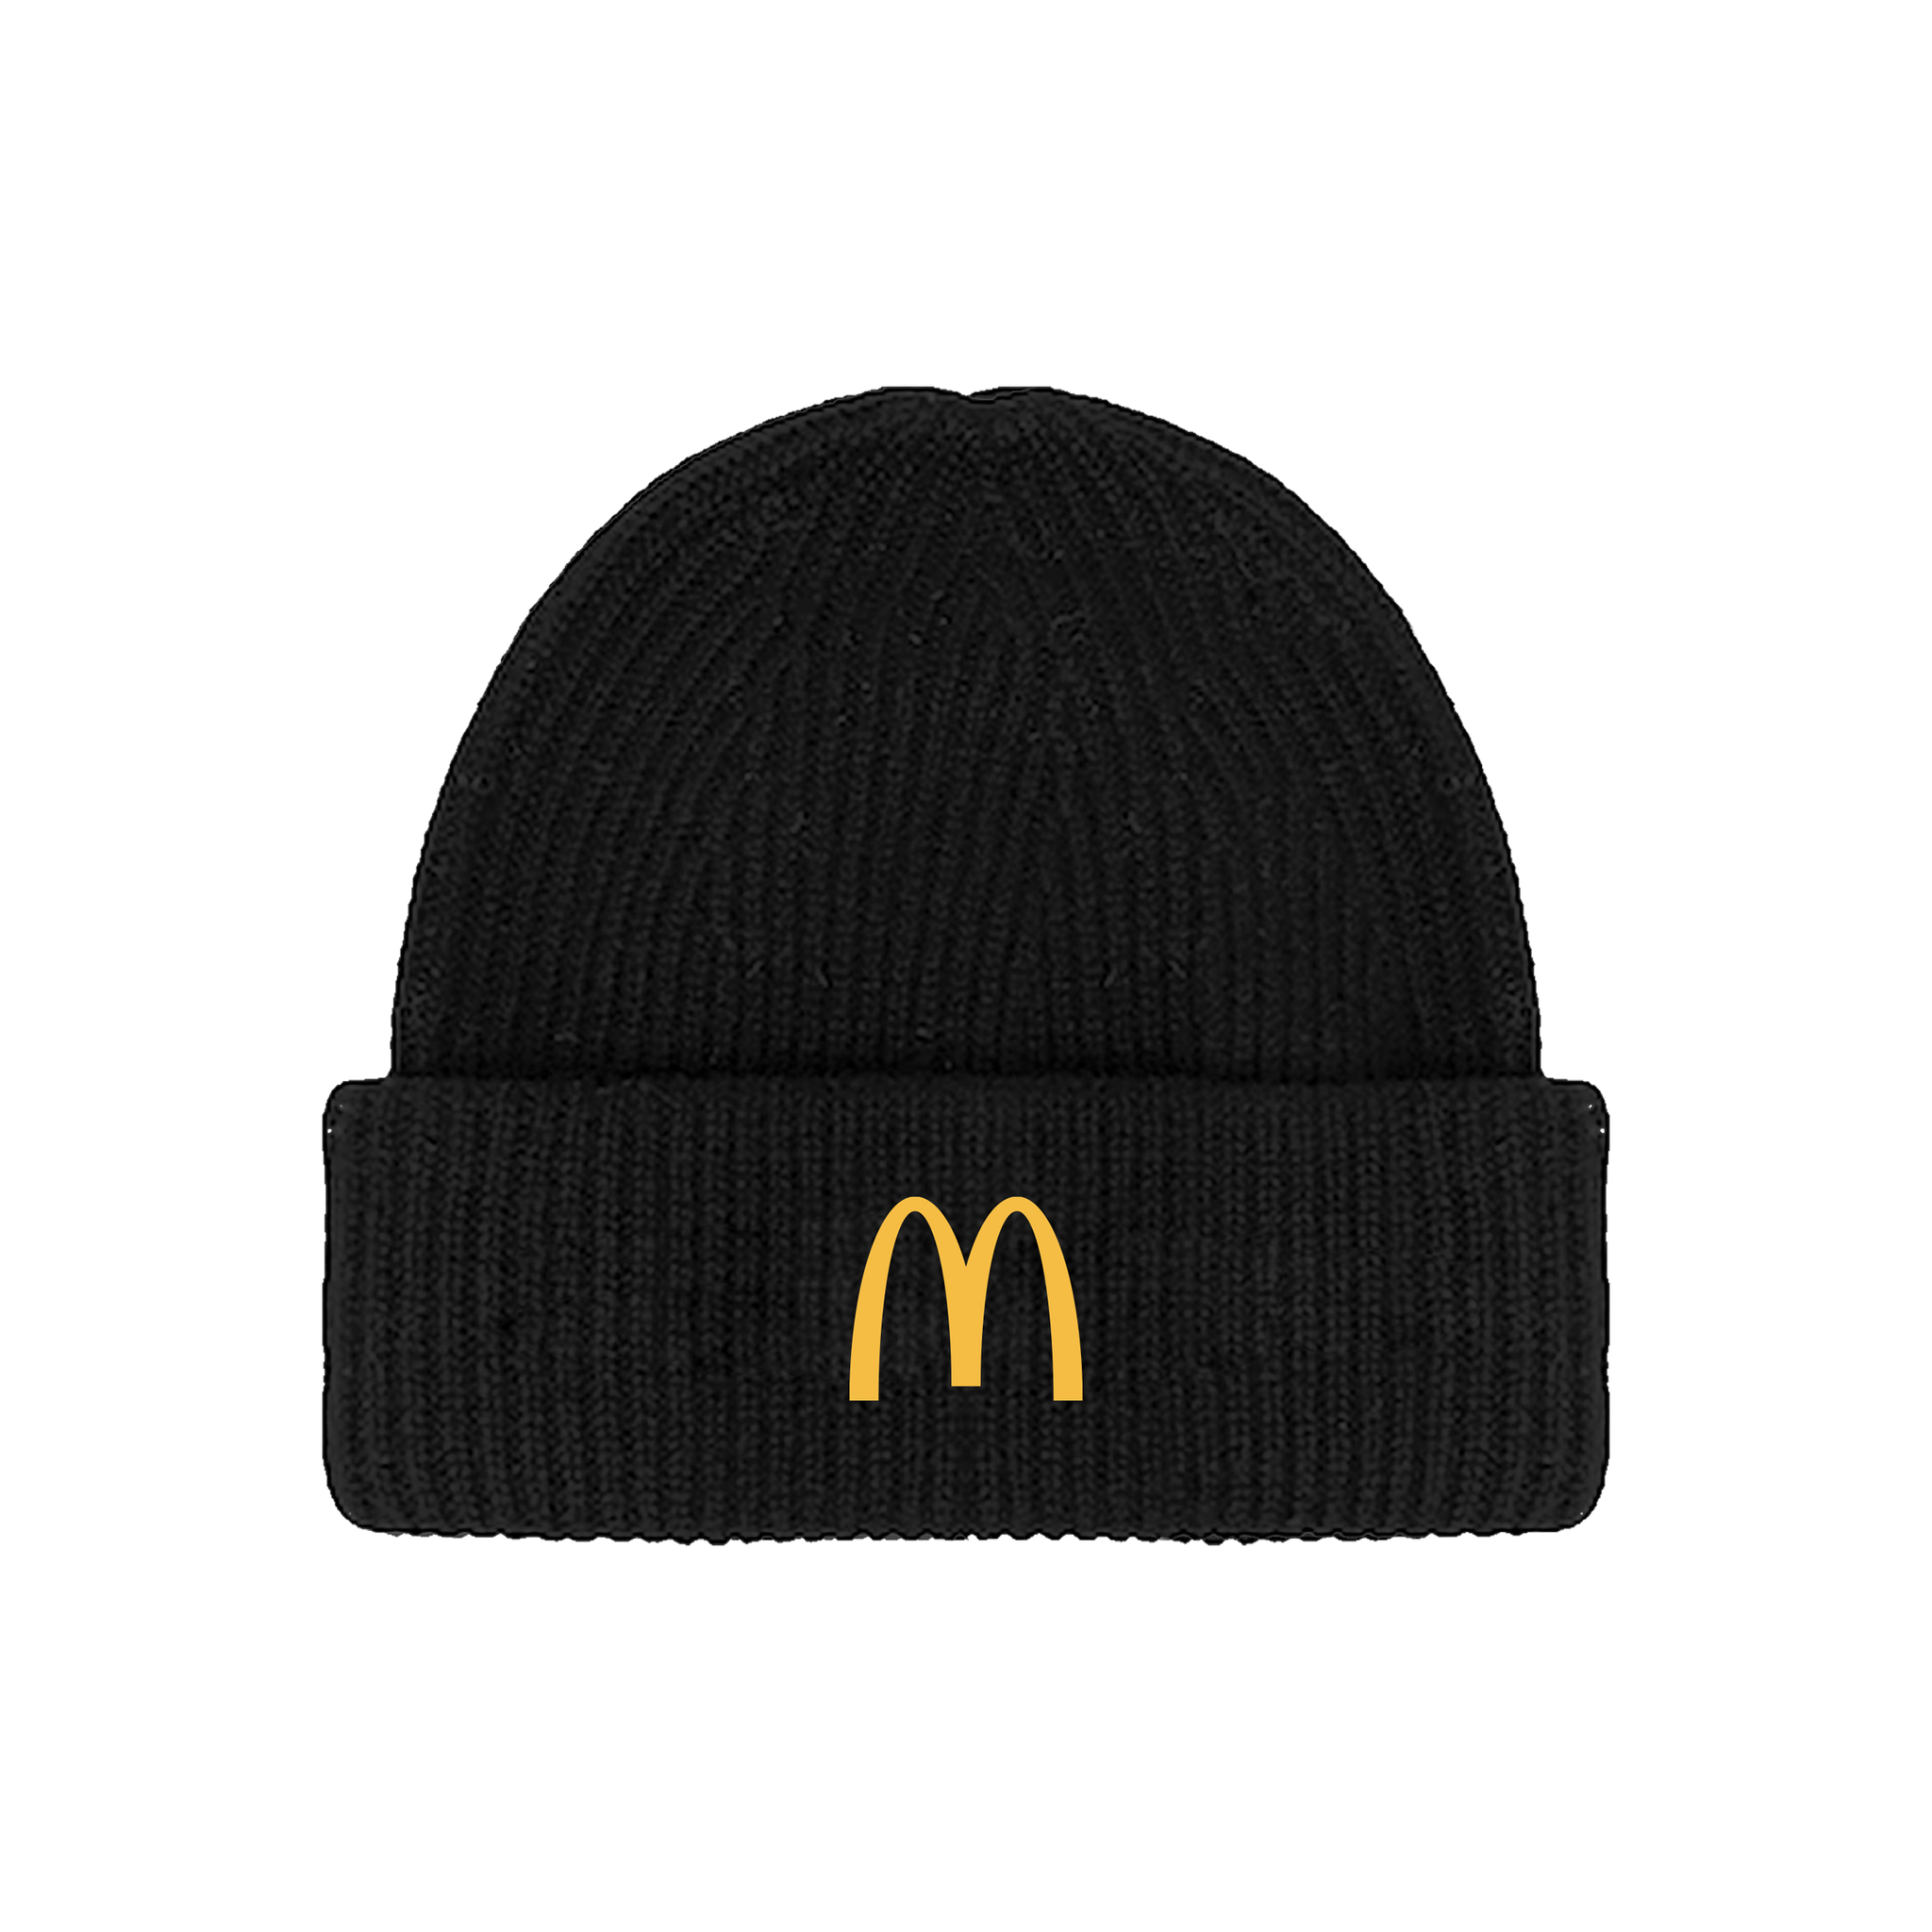 THE CARDI B & OFFSET MEAL BEANIE